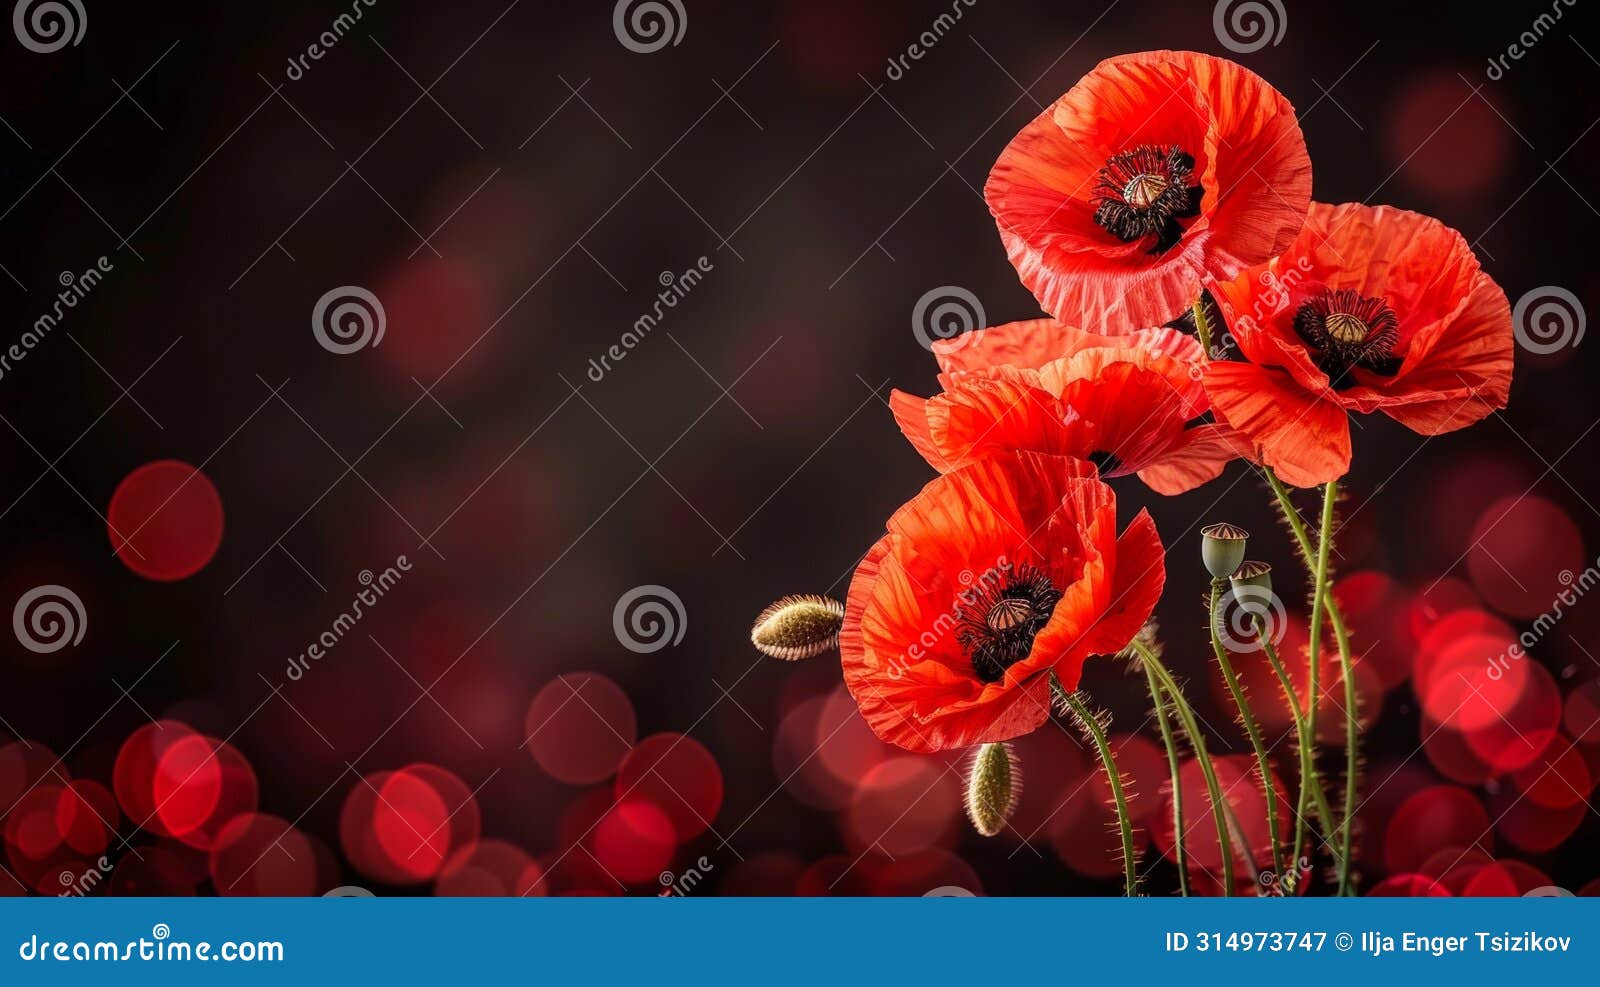 artistic red poppies on black, izing remembrance, armistice, and anzac day commemoration